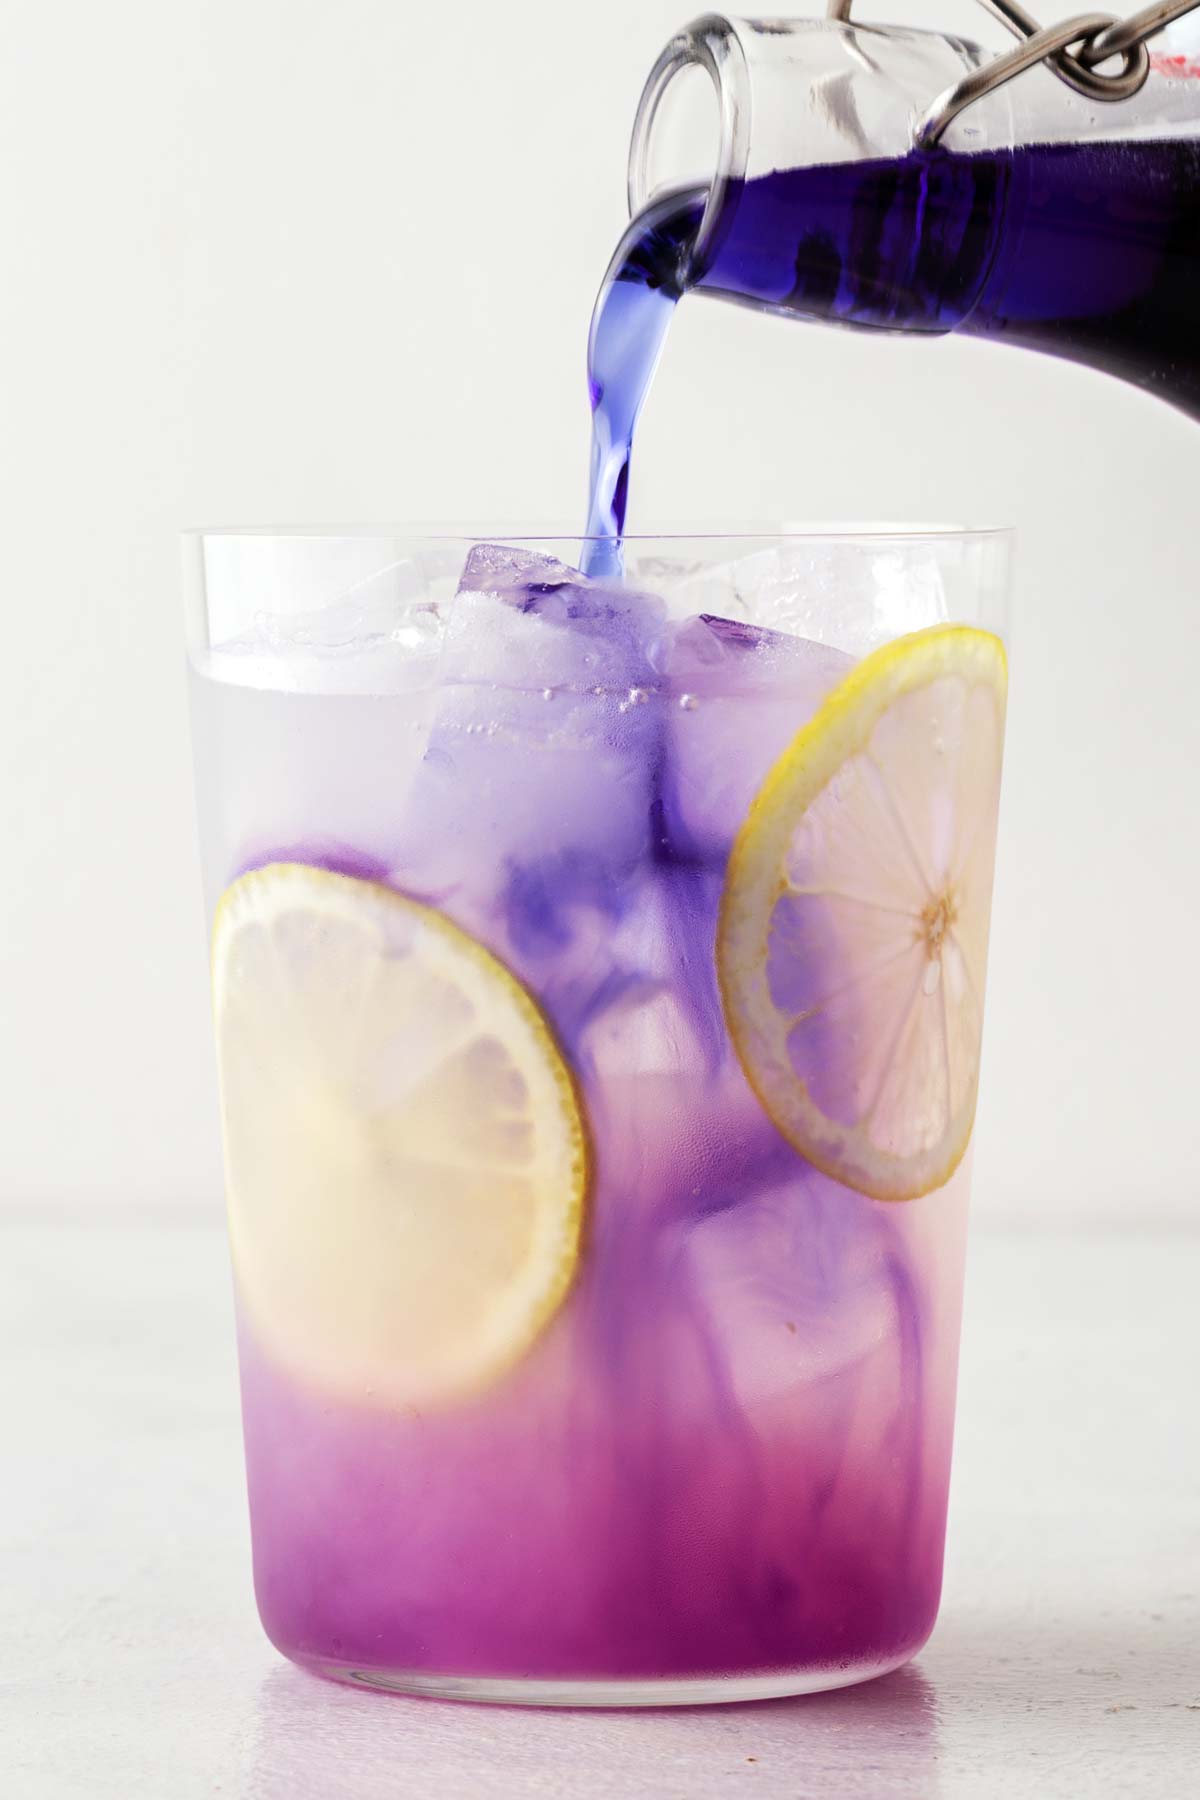 Butterfly Pea Flower Syrup being poured into clear glass with lemonade.